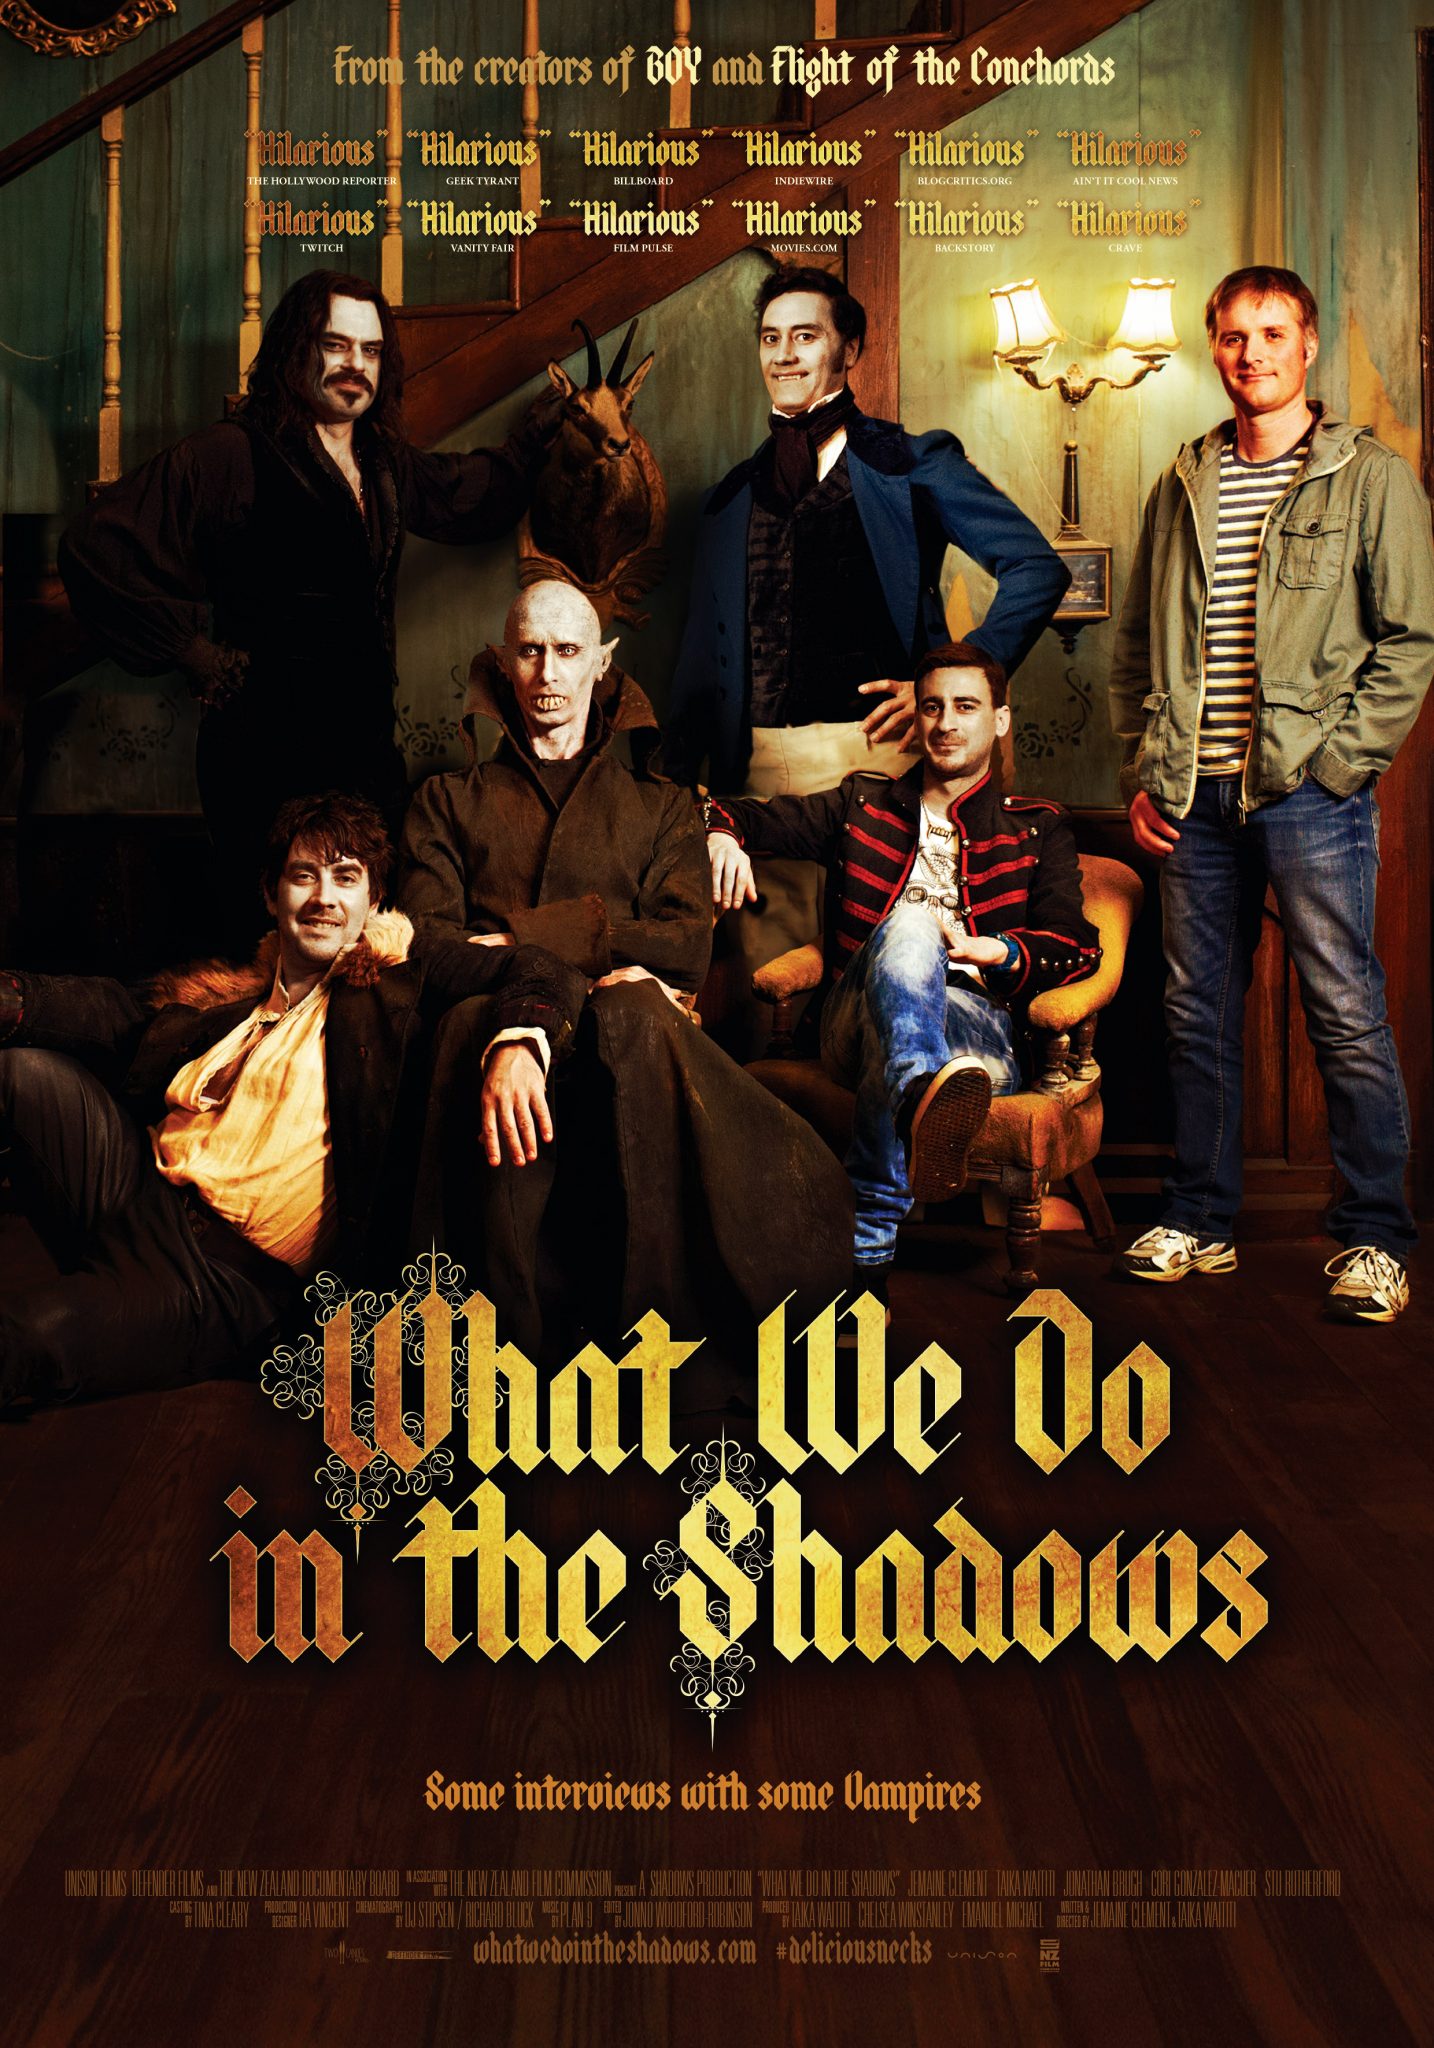 WHAT-WE-DO-IN-THE-SHADOWS-poster.jpg